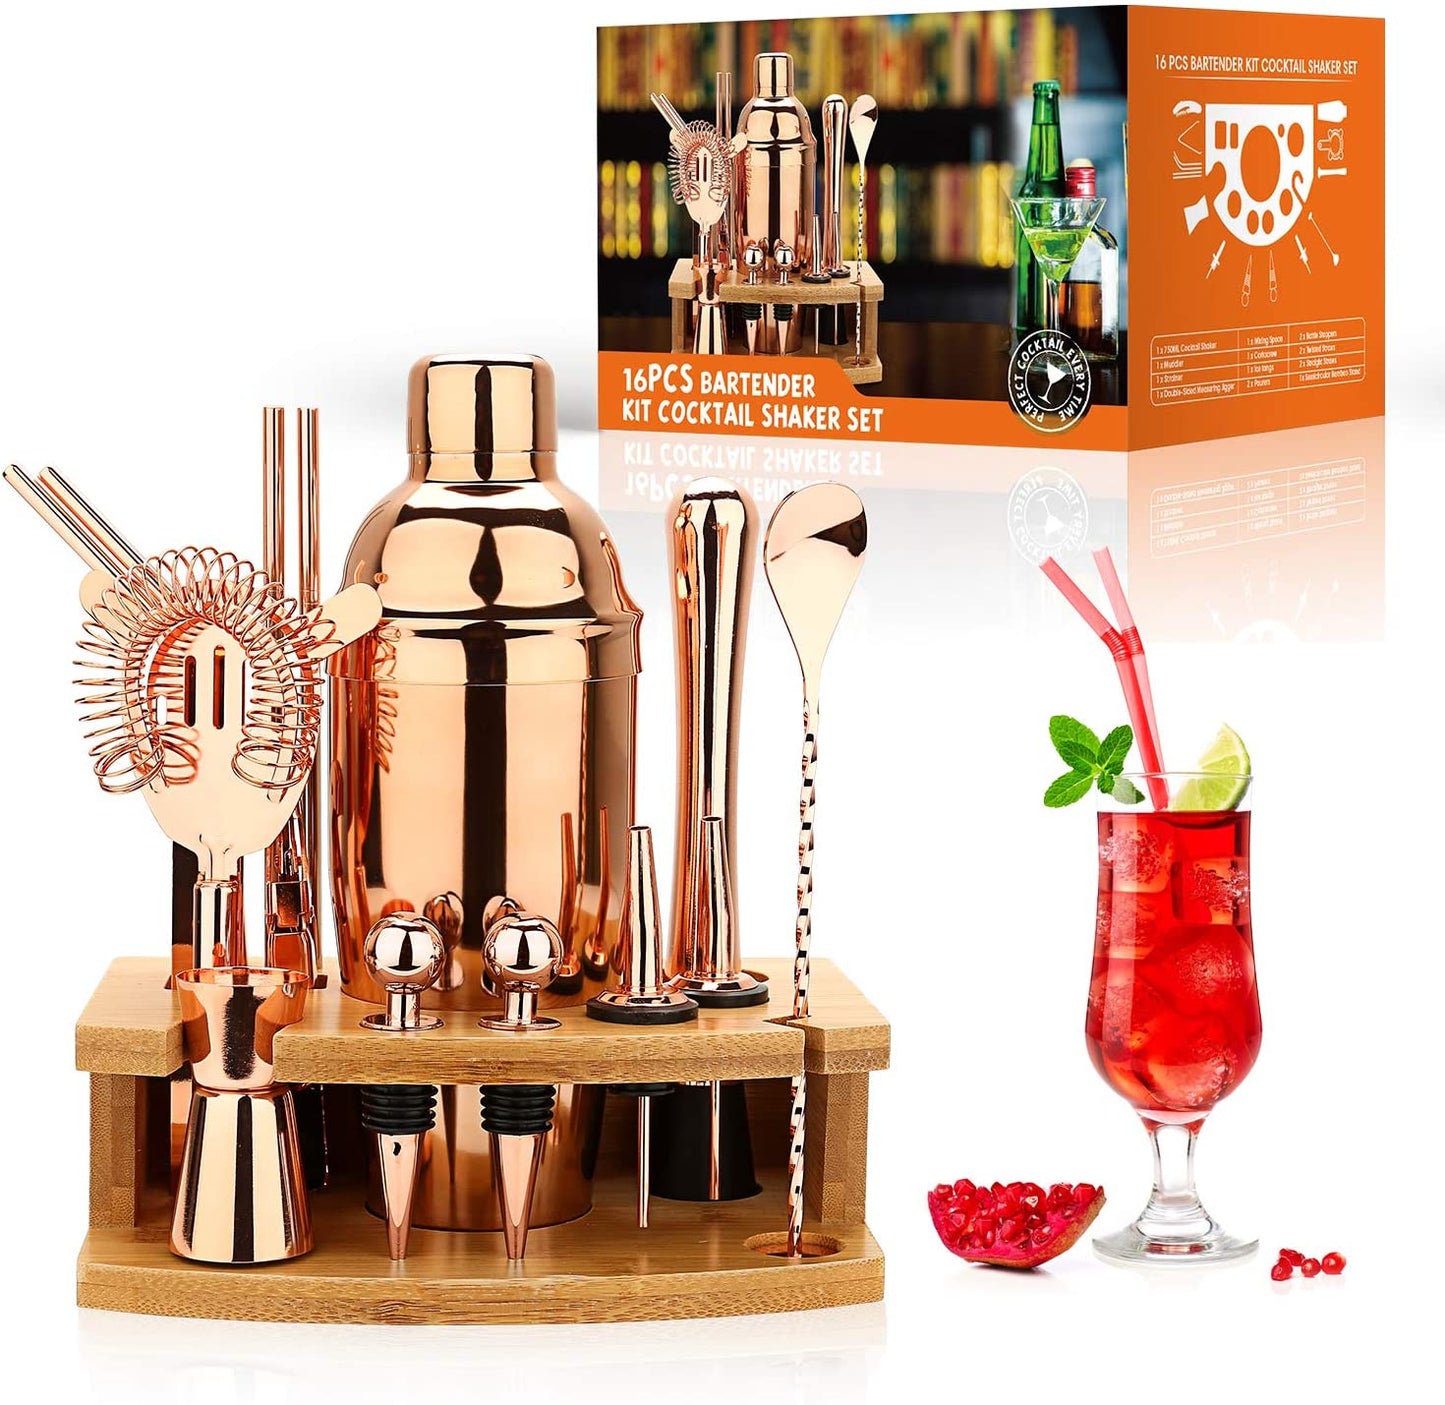 Cocktail Shaker Making Set,16pcs Bartender Kit For Mixer Wine Martini, Stainless Steel Bars Tool, Home Drink Party Accessories*